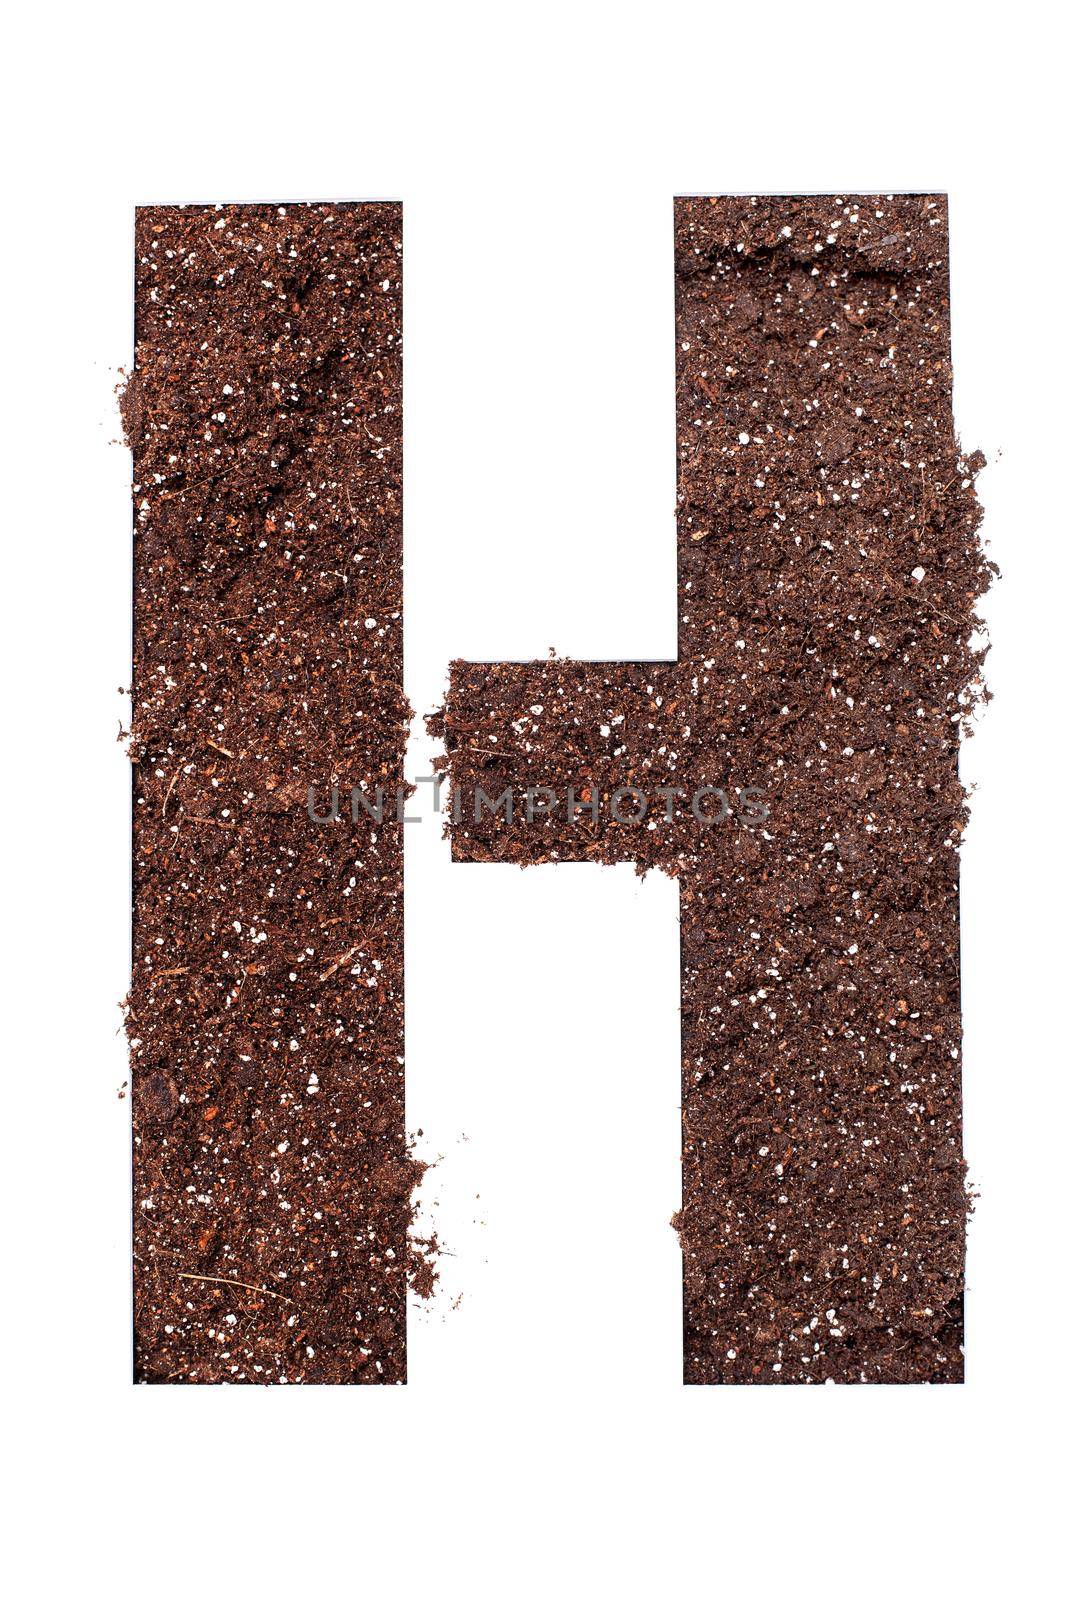 stencil letter H made above dirt on white surface by kokimk